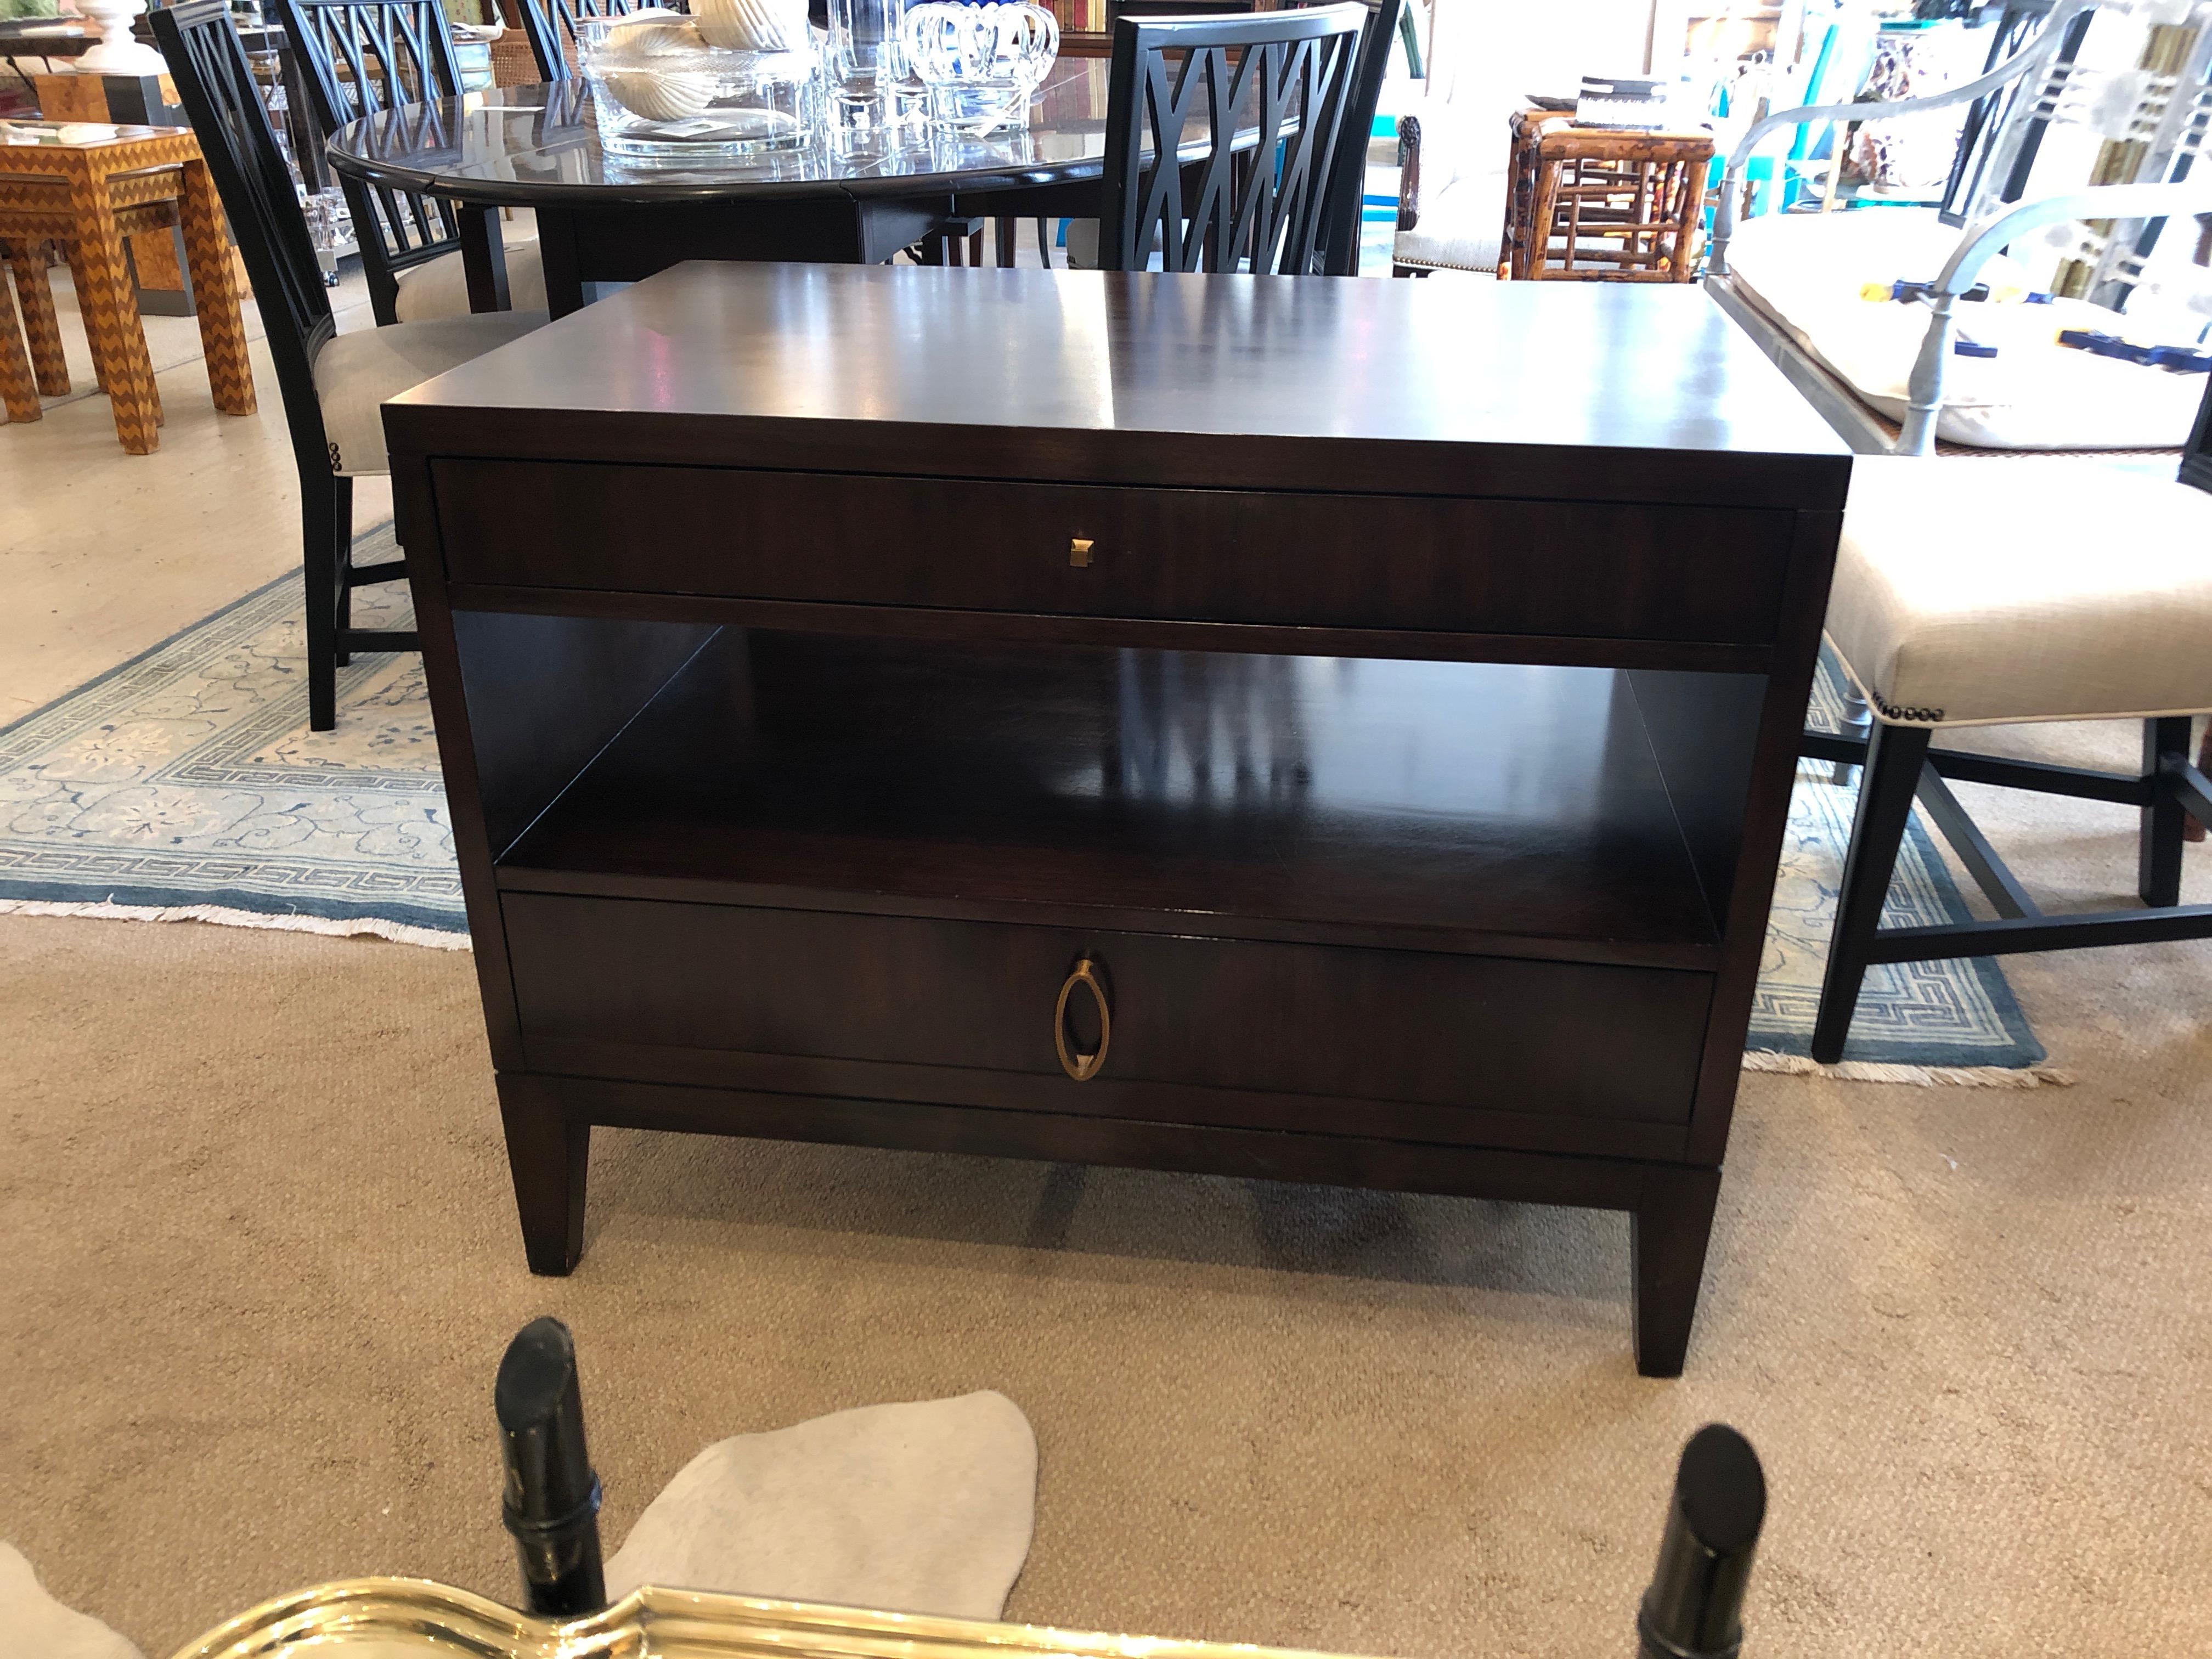 Two well made dark mahogany nightstands by Barbara Barry with her Classic elegance, having a narrow drawer on top, open area in the middle, and larger drawer at the bottom. Tapered handsome feet and modern brass hardware.